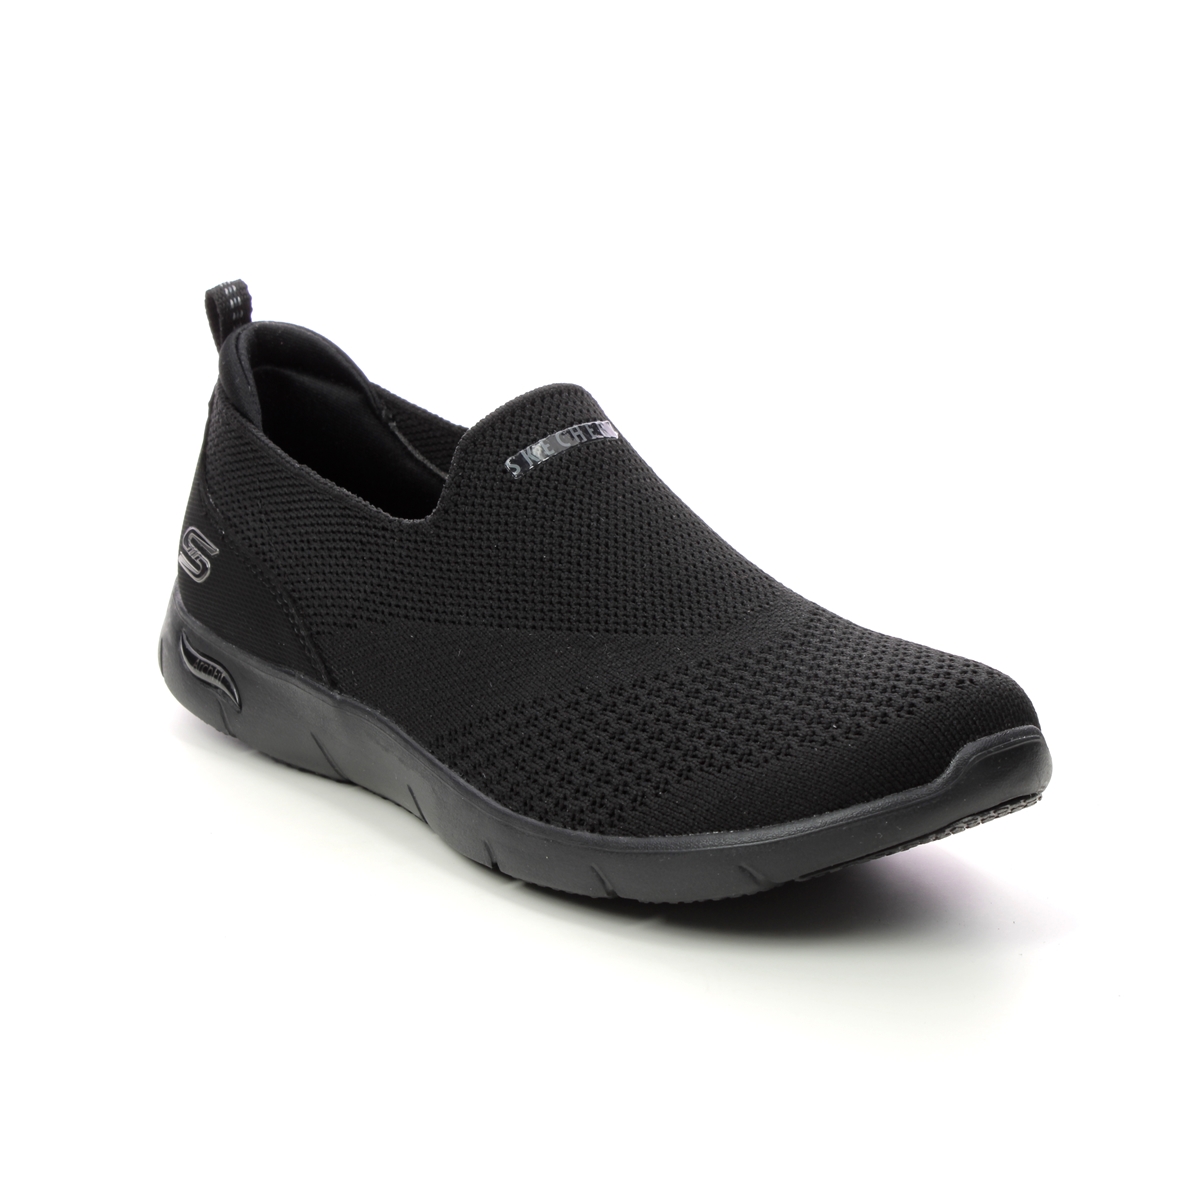 Skechers Arch Fit Refine Slip On BBK Black Womens trainers 104164 in a Plain Textile in Size 4